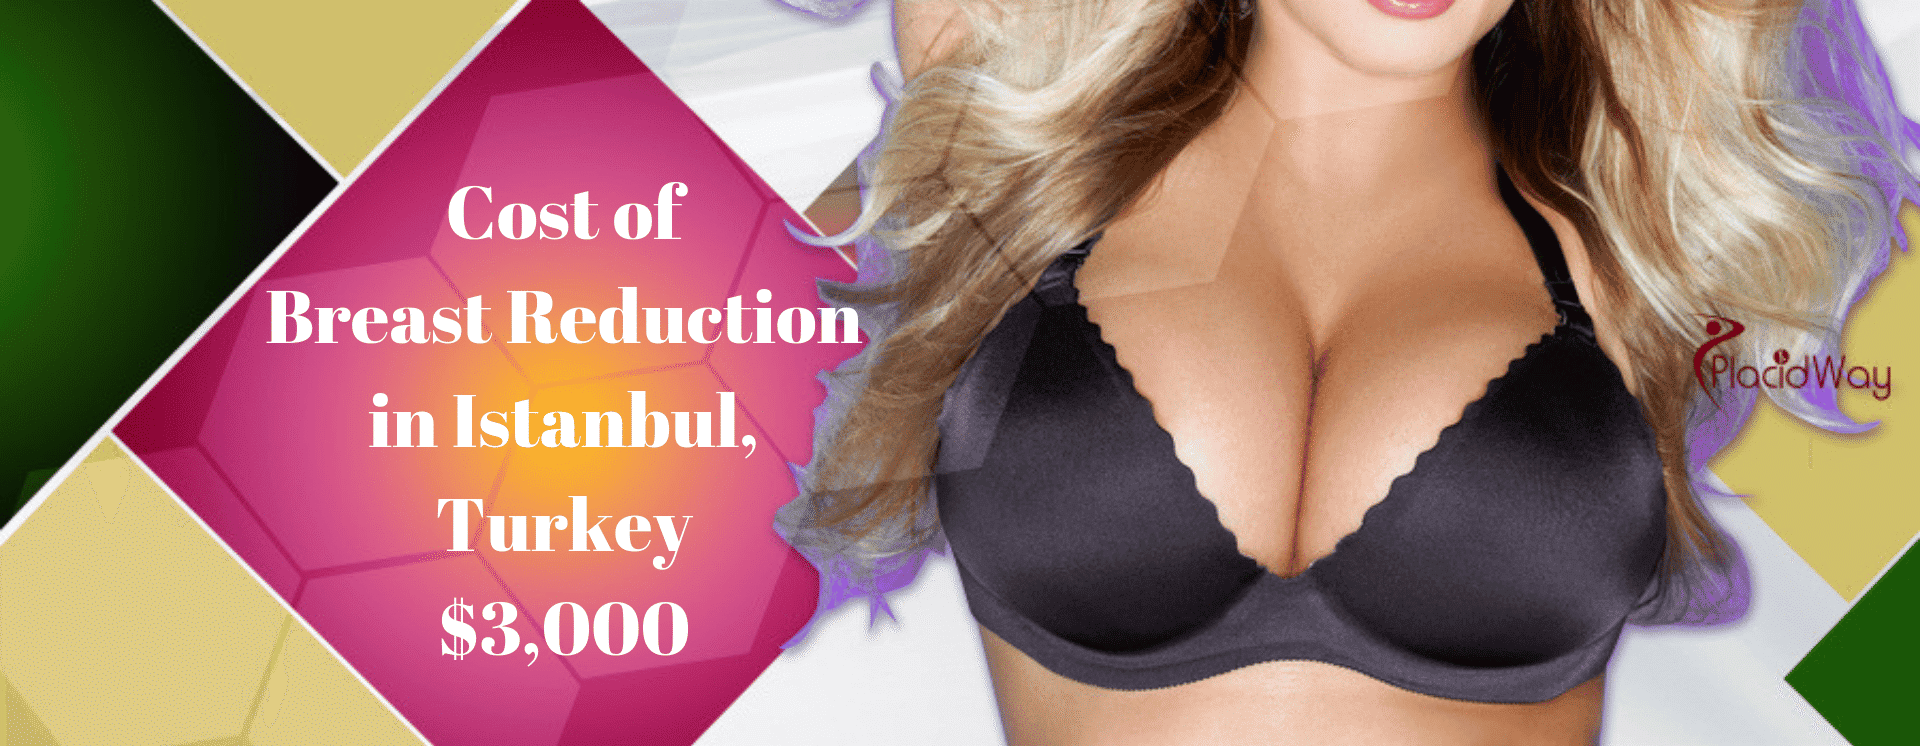 Breast Reduction Cost in Istanbul, Turkey